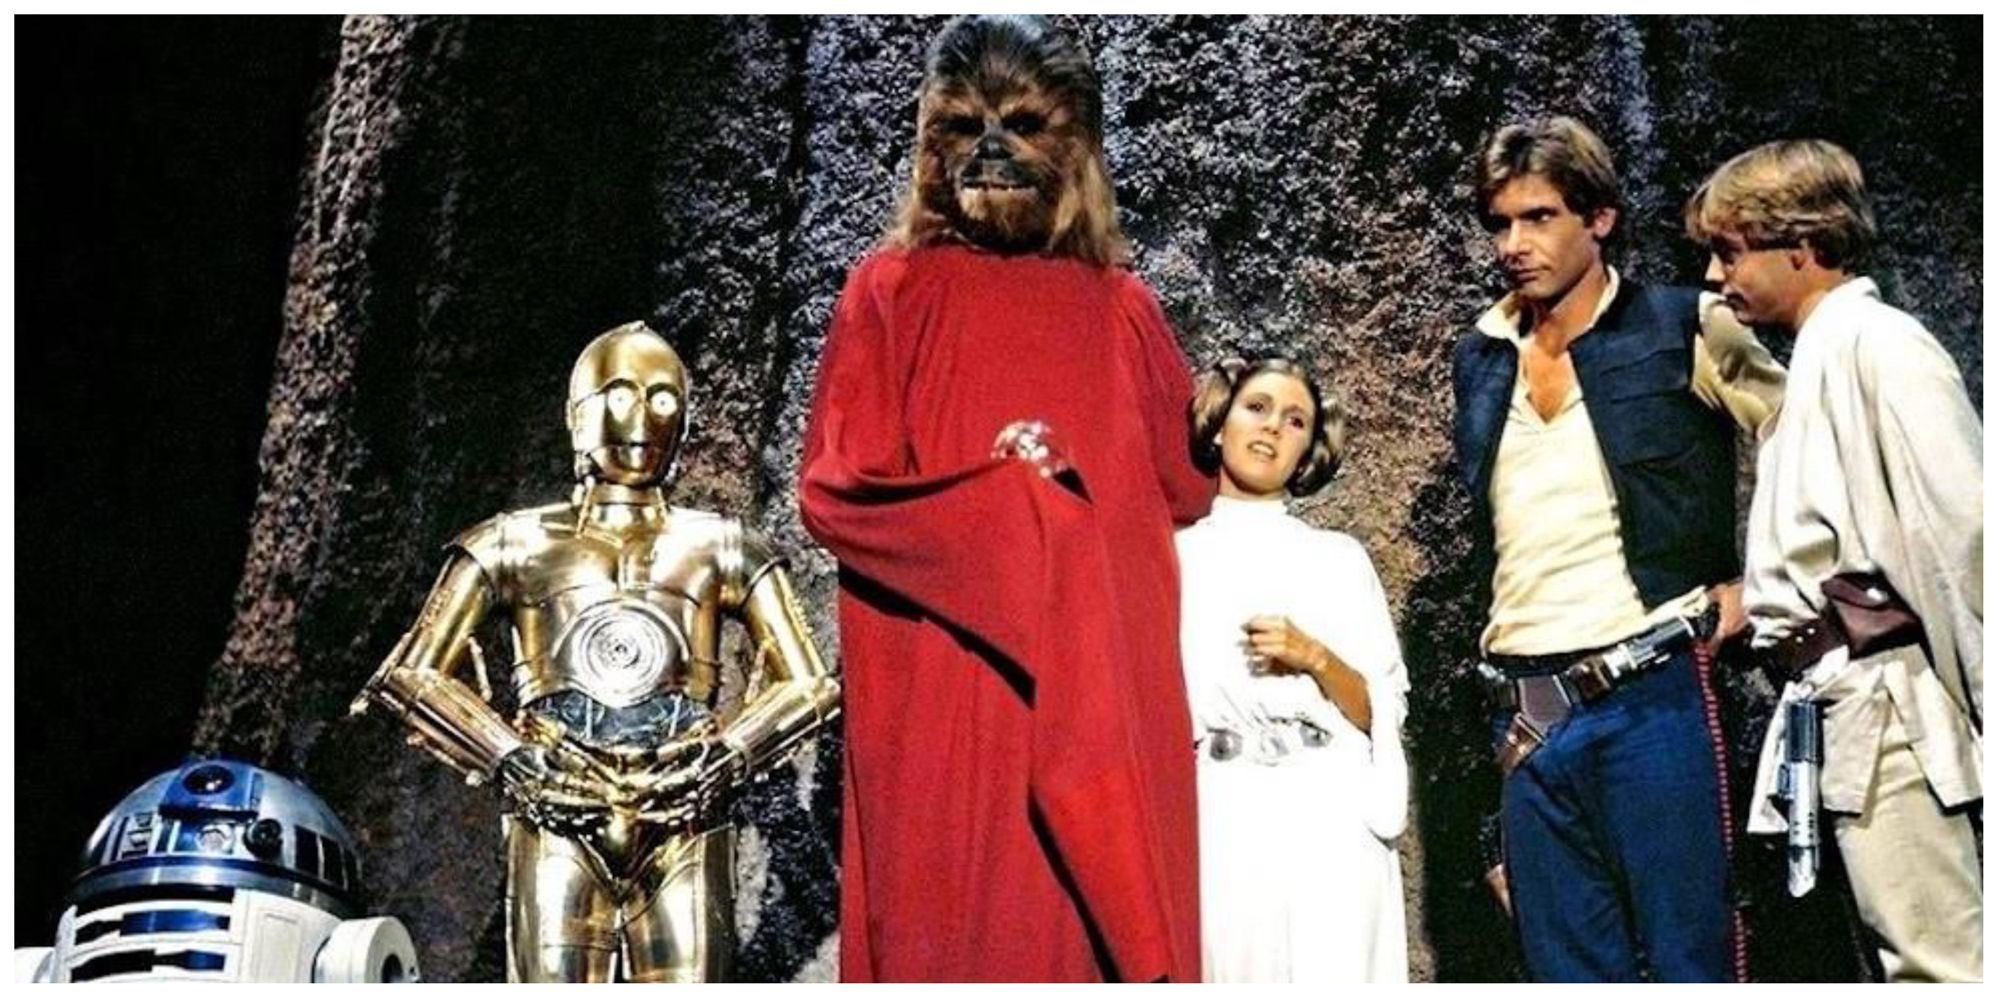 R2D2, C3PO, Han, Leia, Luke, and Chewie in The Star Wars Holiday Special